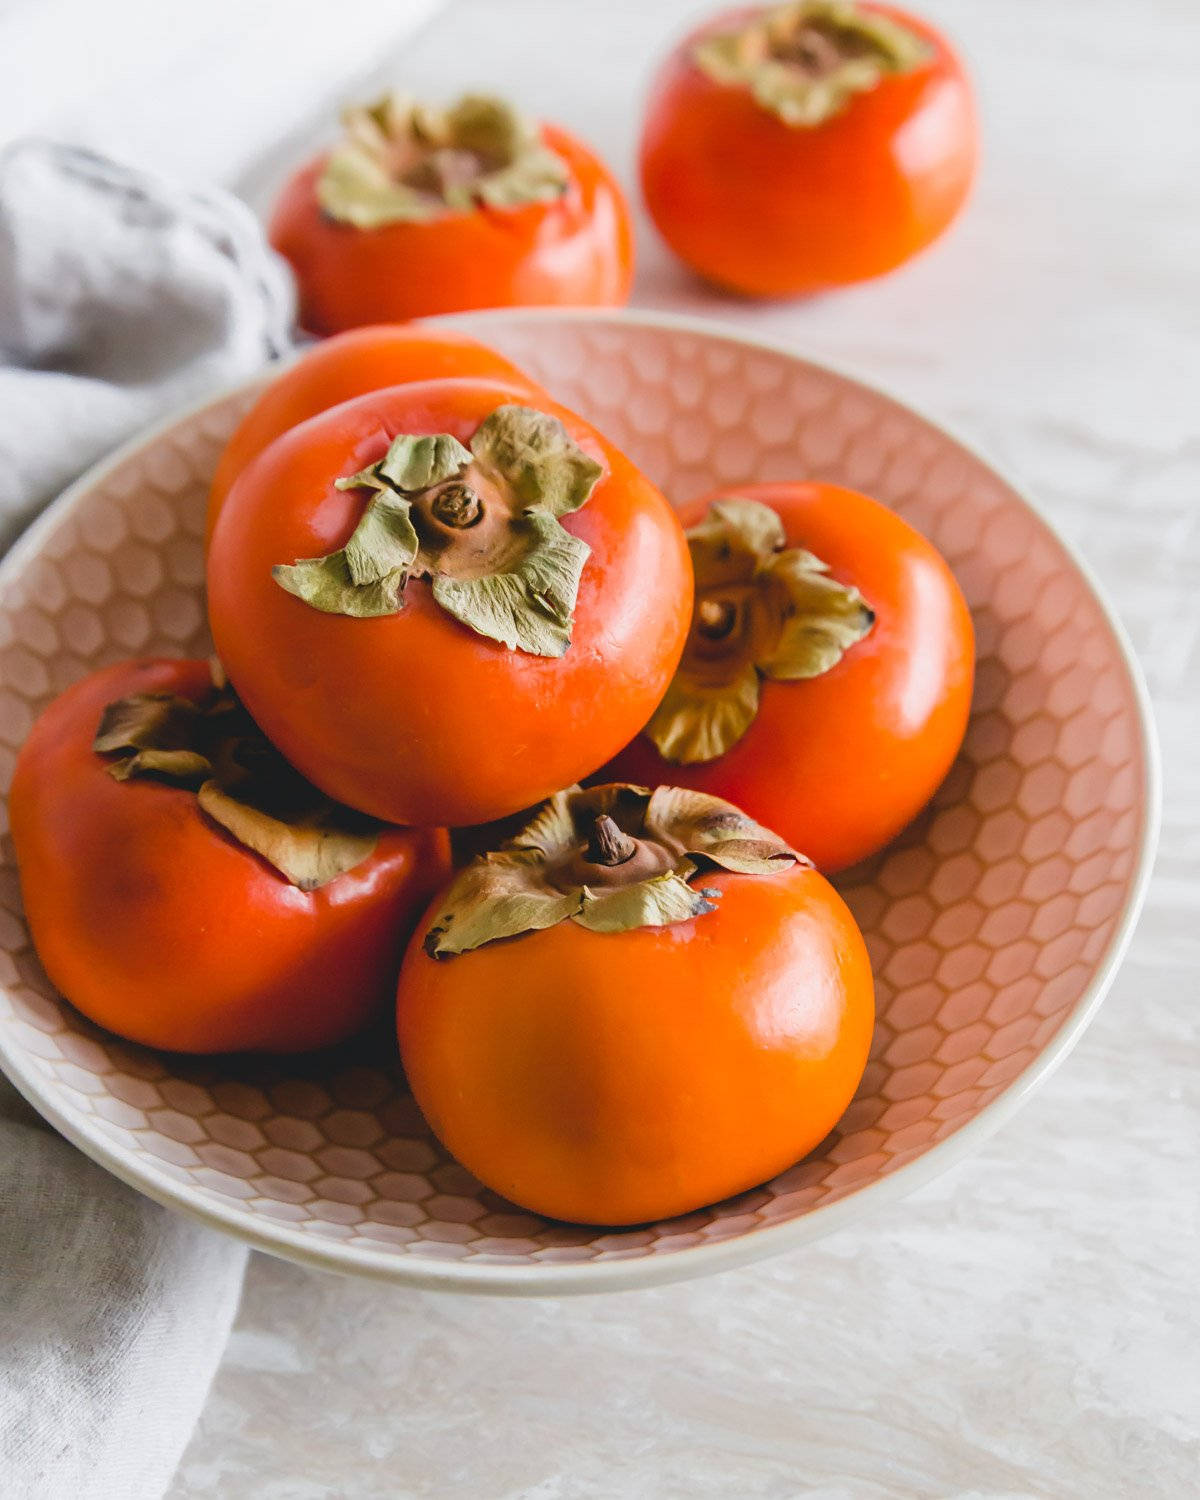 Caption: Fresh Persimmons in a Porcelain Bowl on Rustic Table Wallpaper